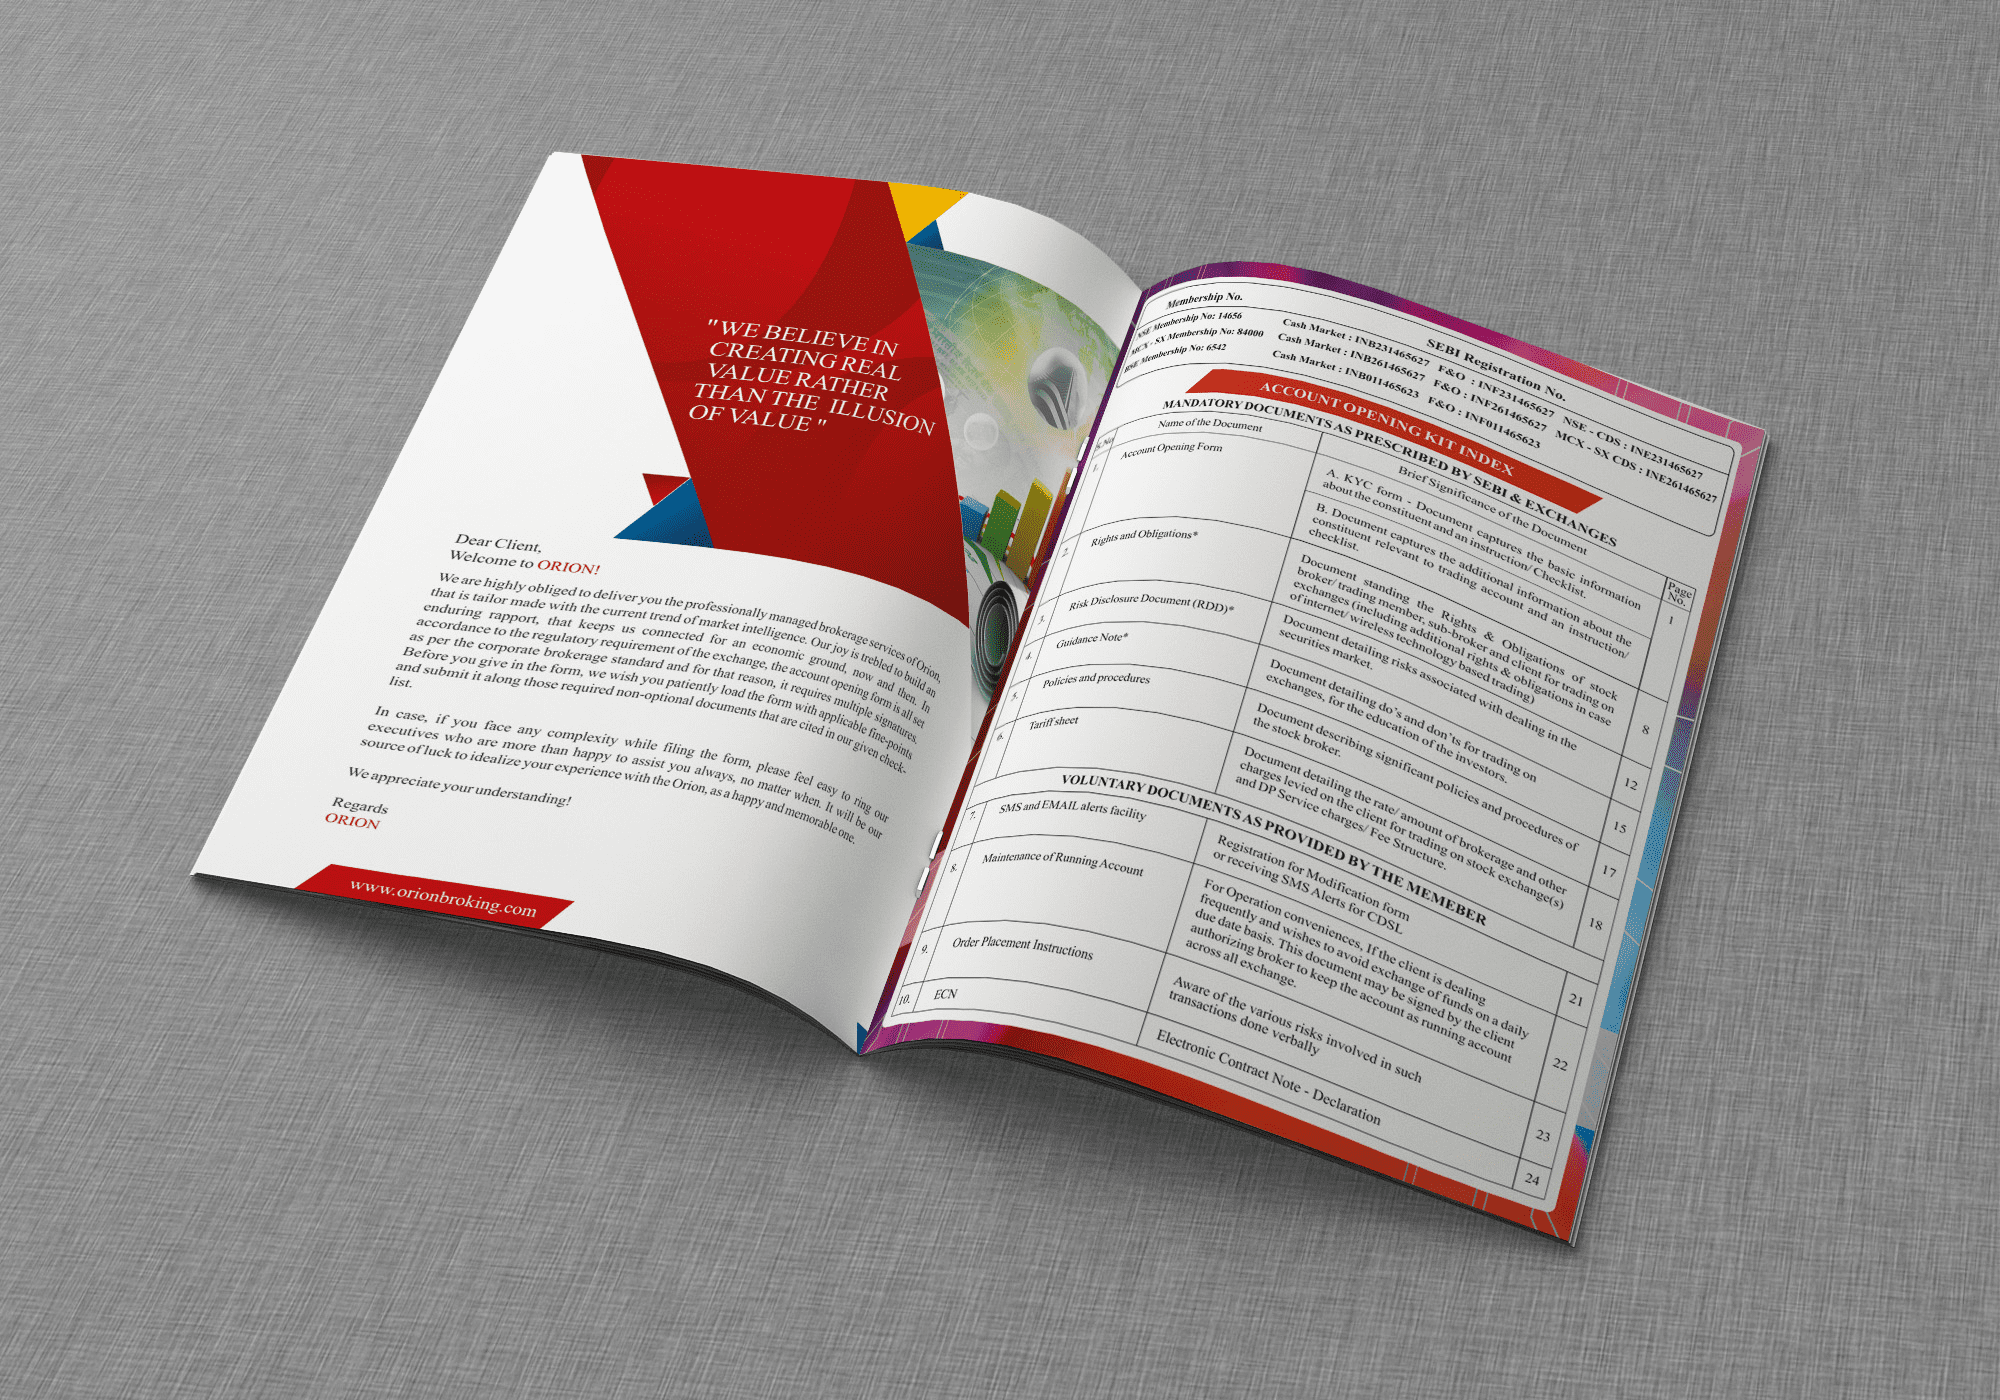 Orion Book Inside Pages Graphic Design, Branding Packaging Design in Coimbatore by Creative Prints thecreativeprints